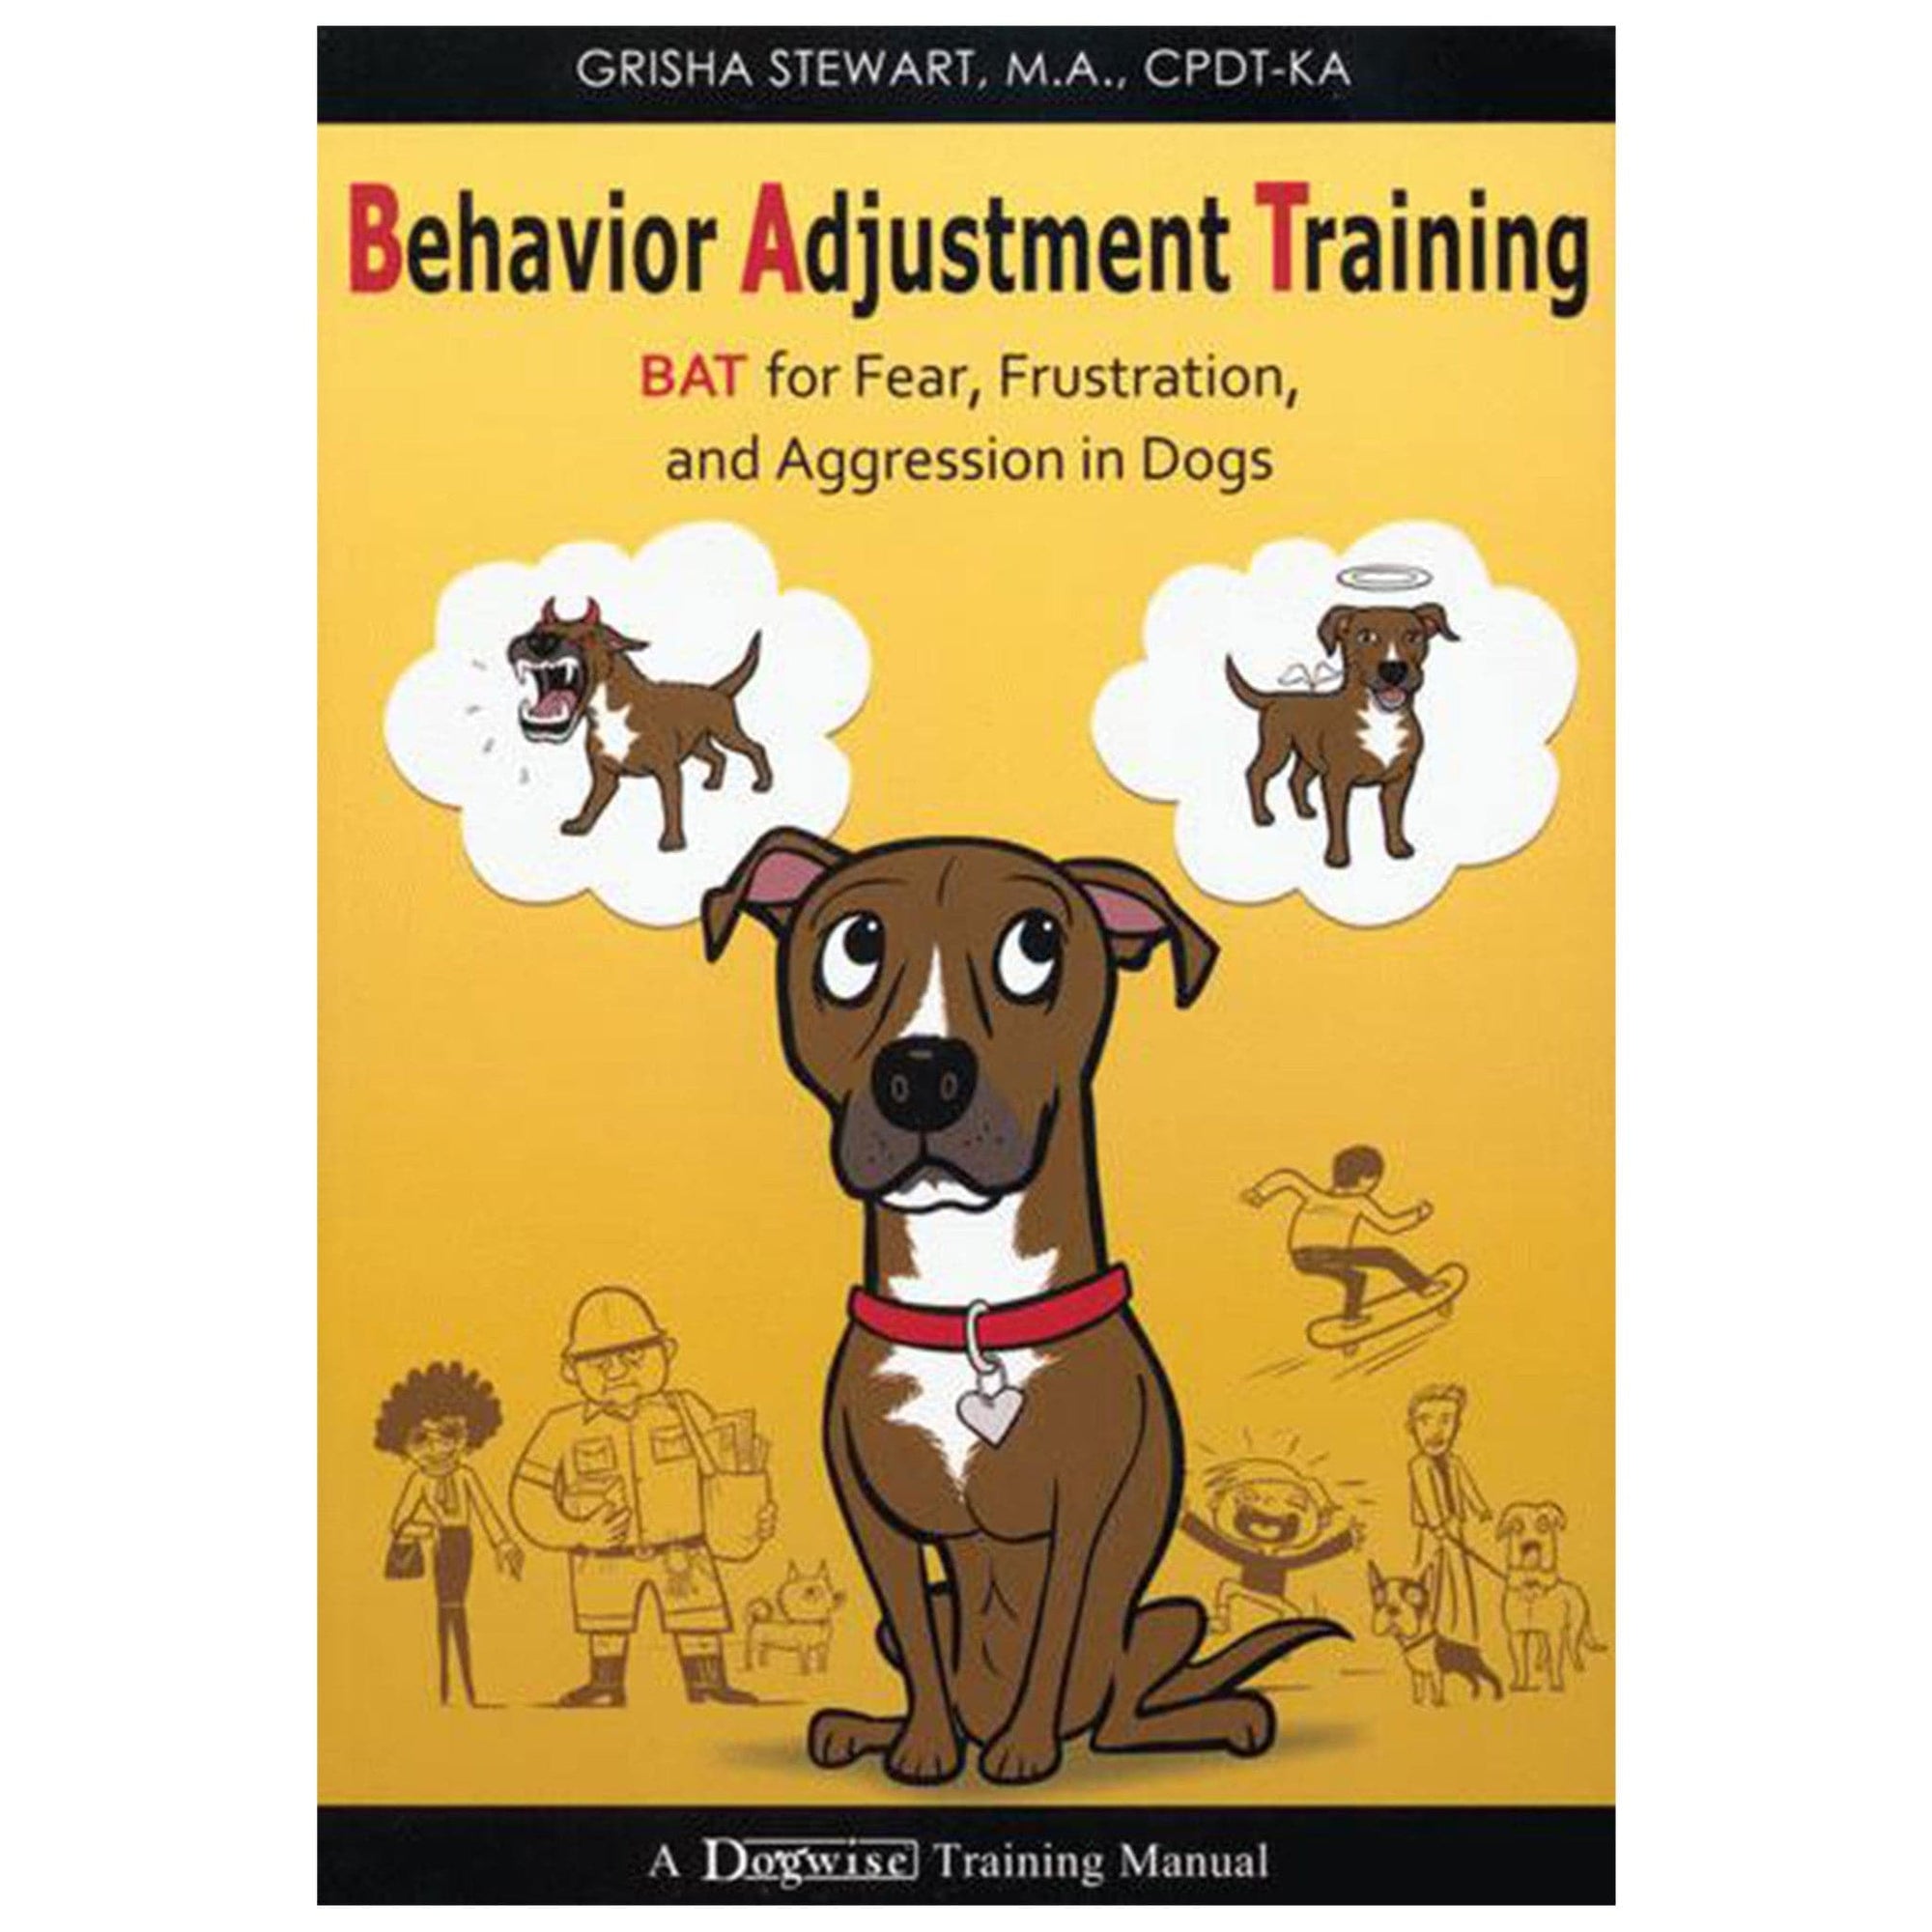 E-BOOK Behavior Adjustment Training: BAT for Fear, Frustration, and Aggression in Dogs by Grisha Stewart